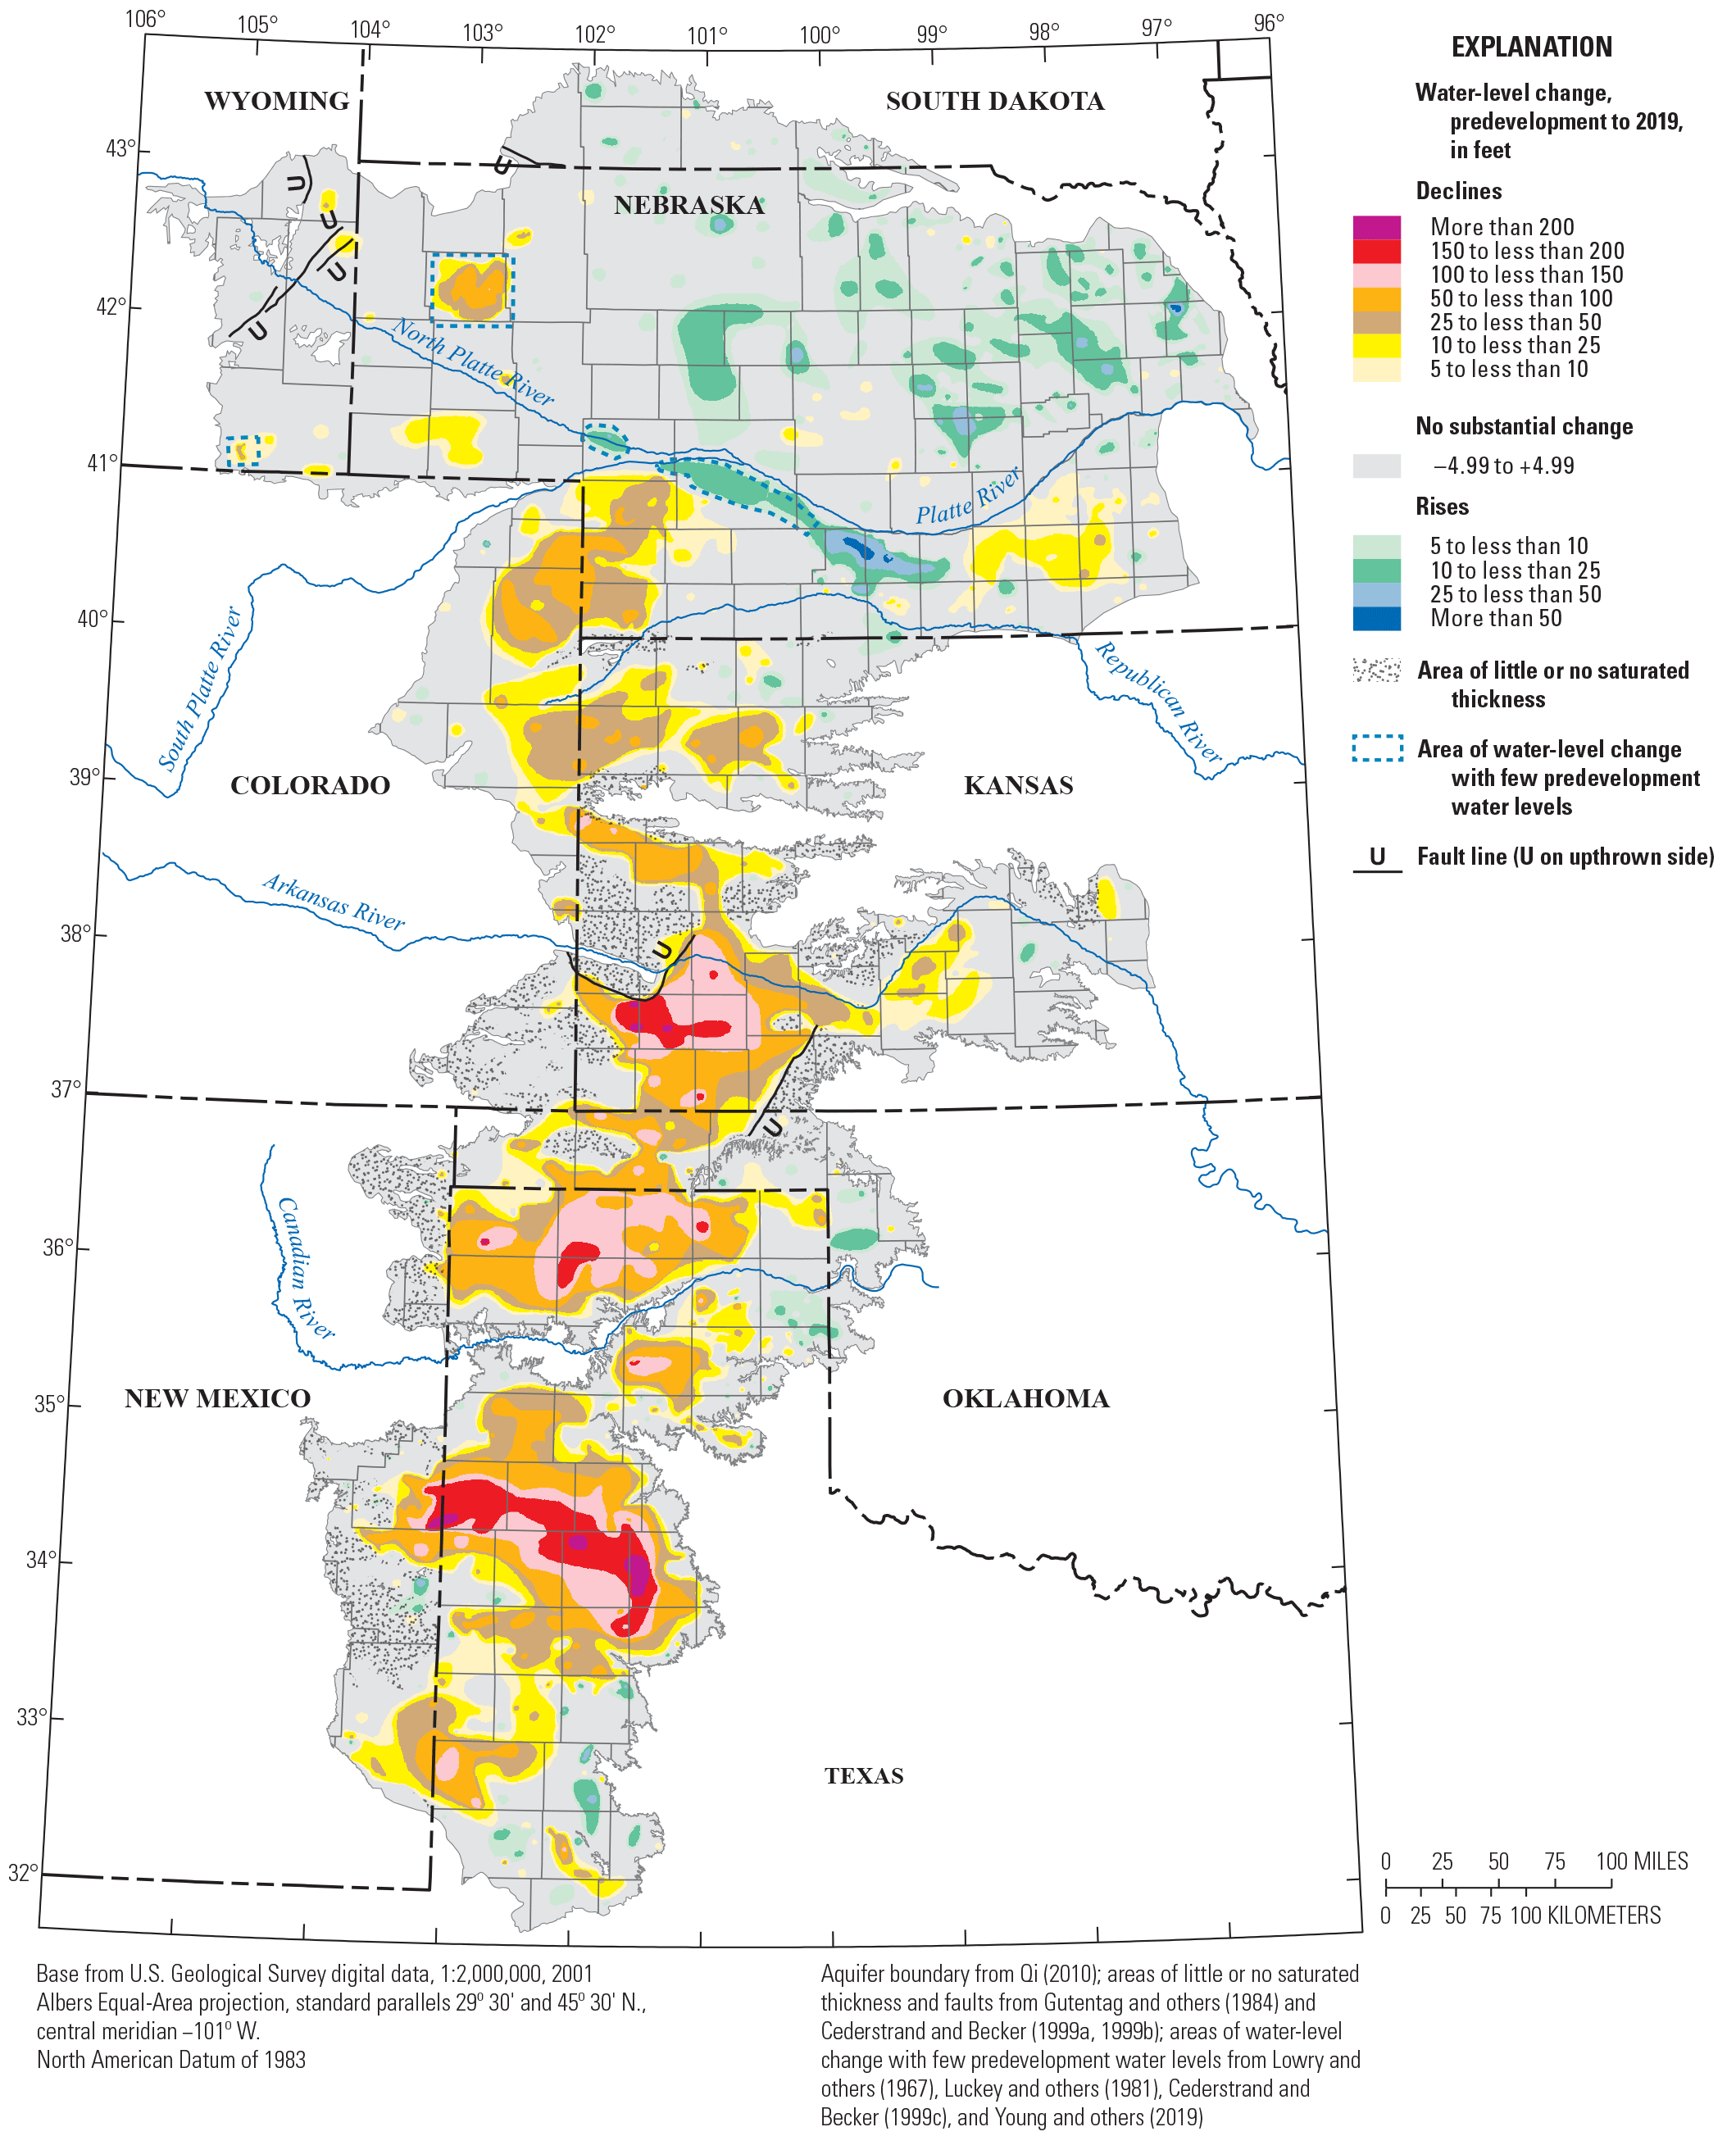 Most of the High Plains aquifer had declines or no substantial change in water level
                     from predevelopment to 2019.